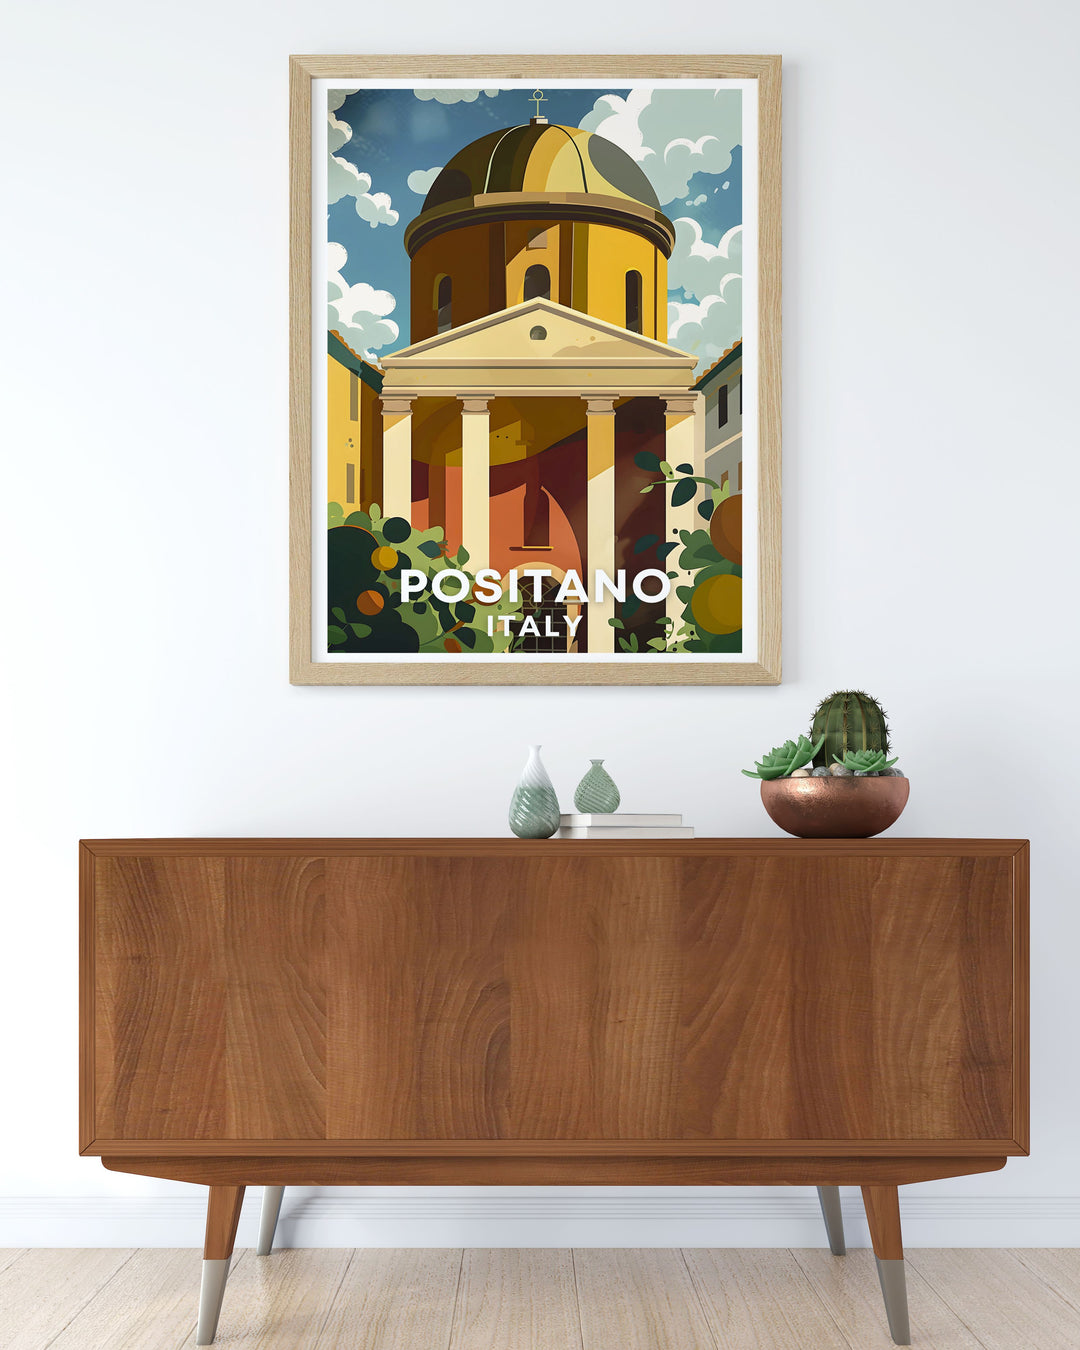 The Chiesa di Santa Maria Assunta artwork capturing the beauty of Positano and Spiaggia Grande perfect for wall decor enhancing any living space with the elegance of Italian architecture and the stunning scenery of the Amalfi Coast